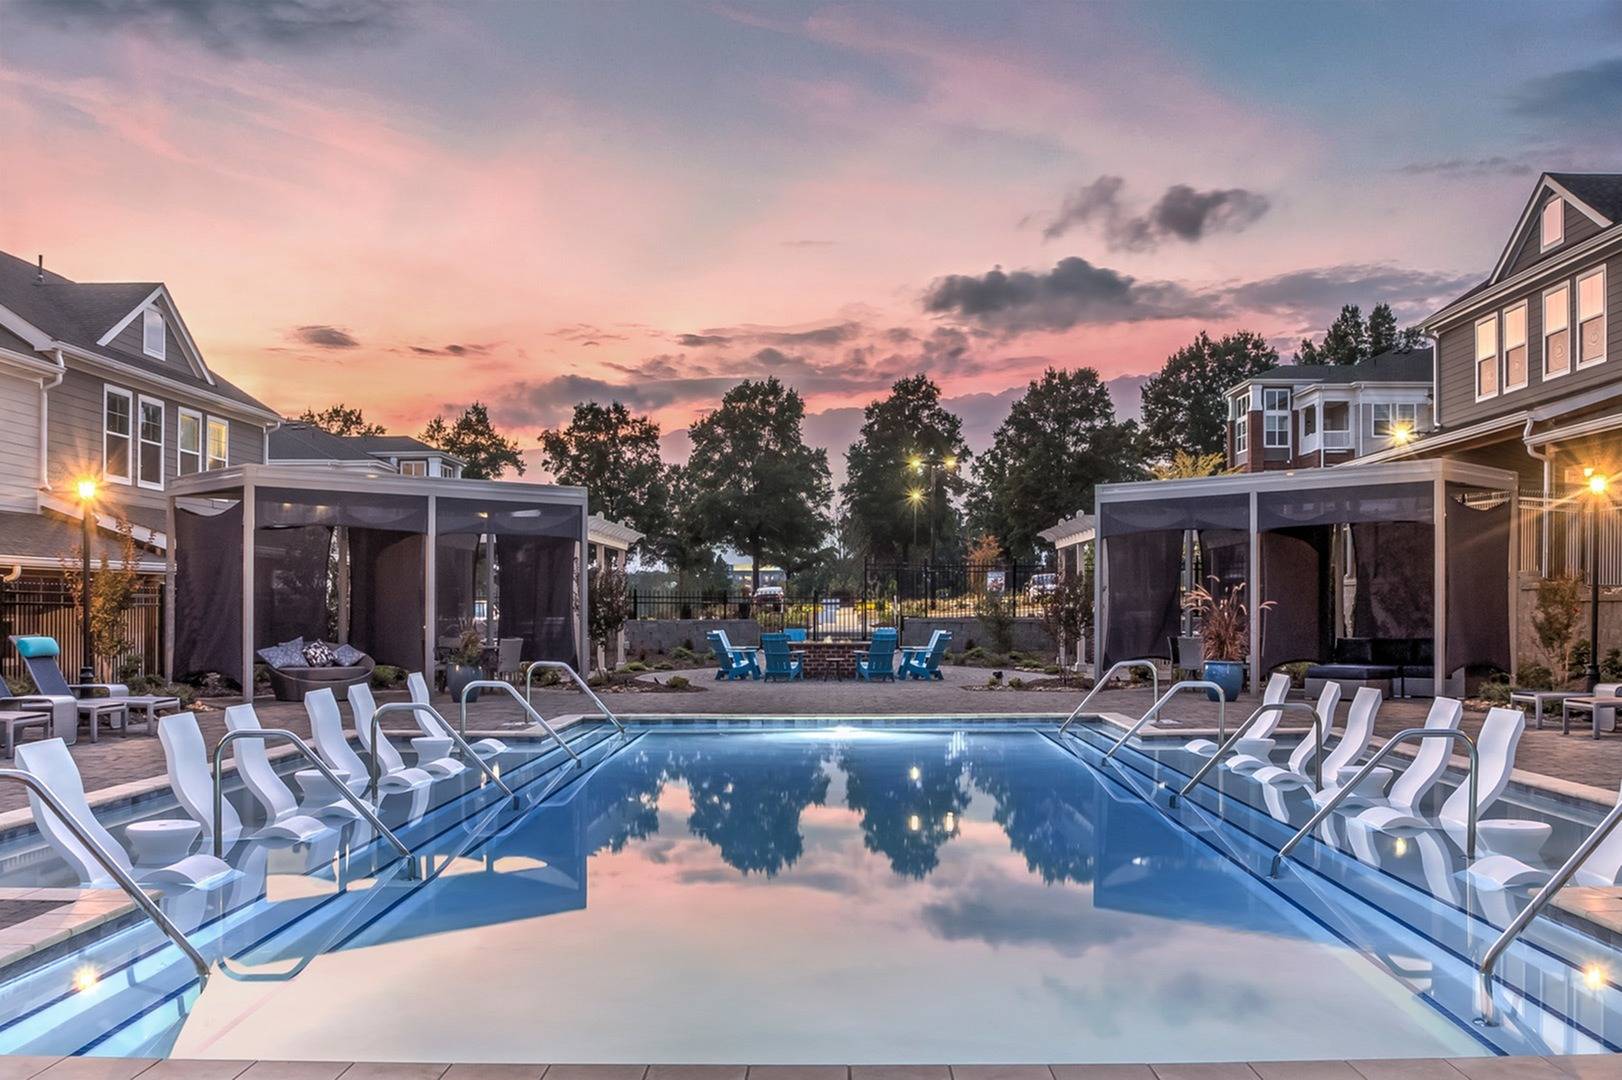 Pool with Cabanas | Apartments in Charlotte, NC | CityPark View